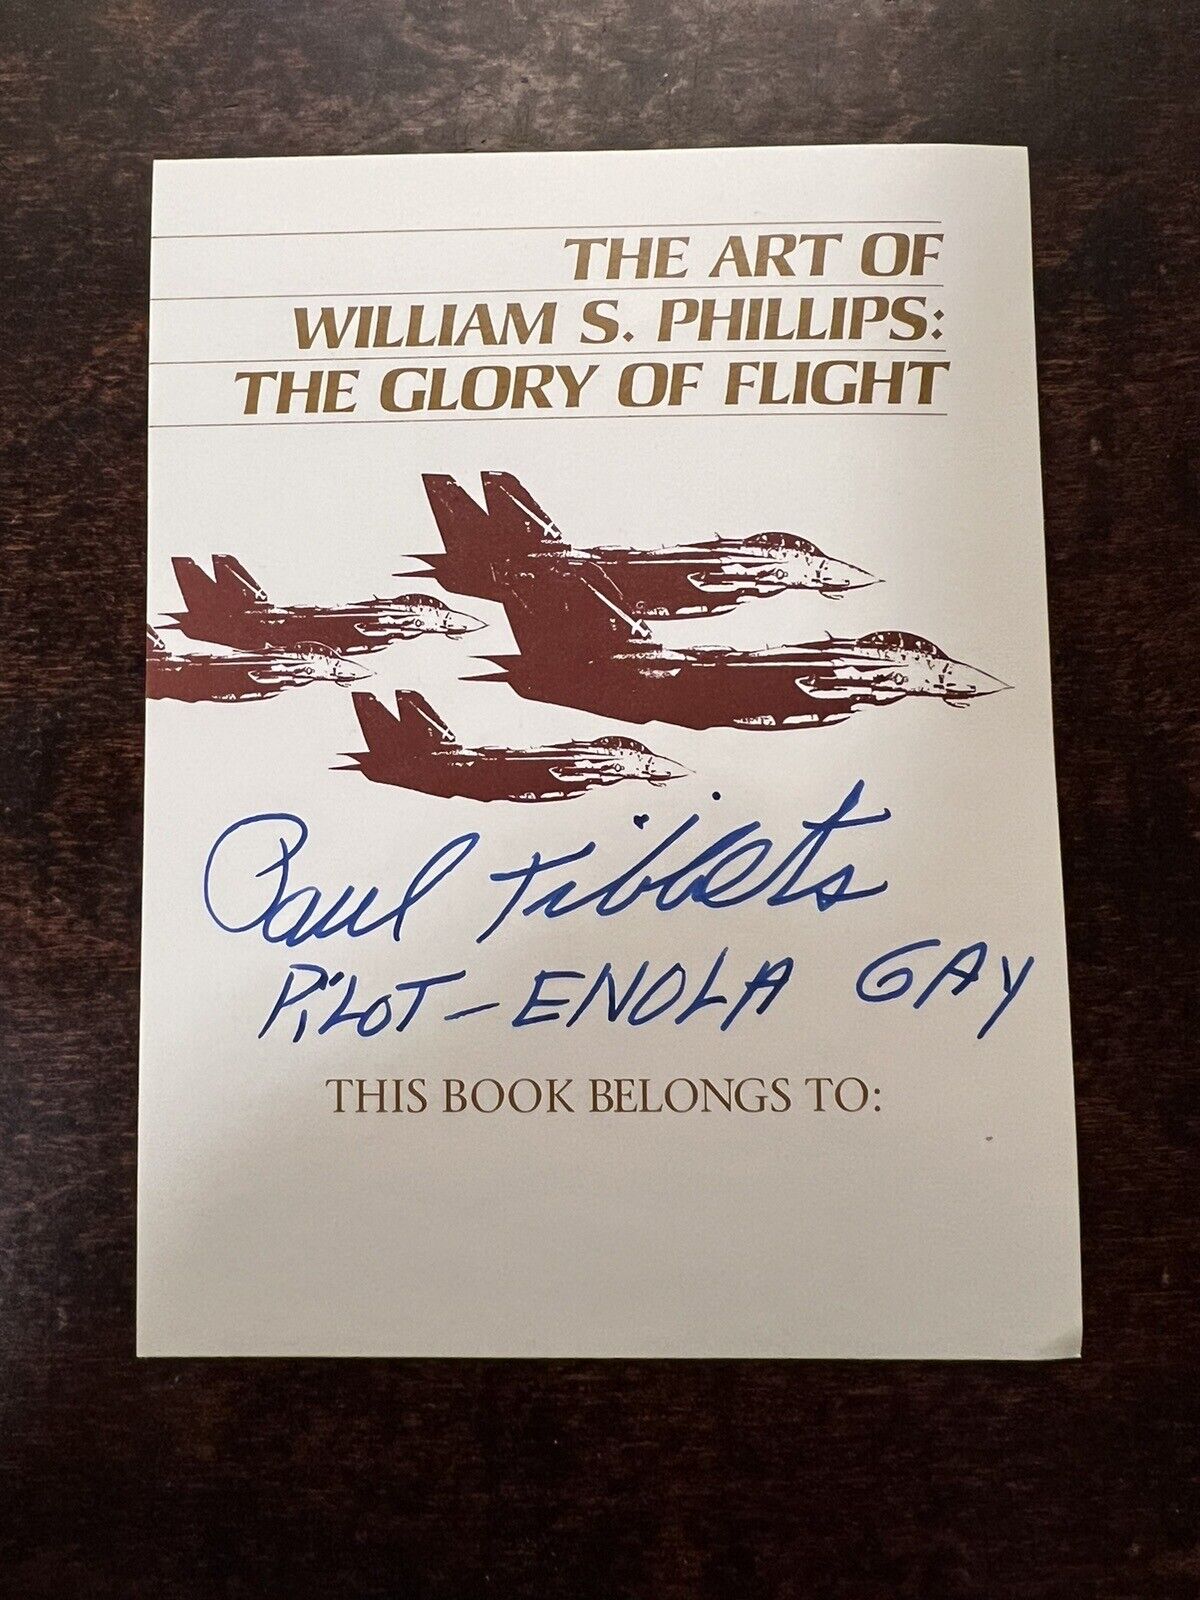 Paul W. Tibbets Autograph, Pilot Enola Gay ( I Have Multiple) Signed In Sharpee